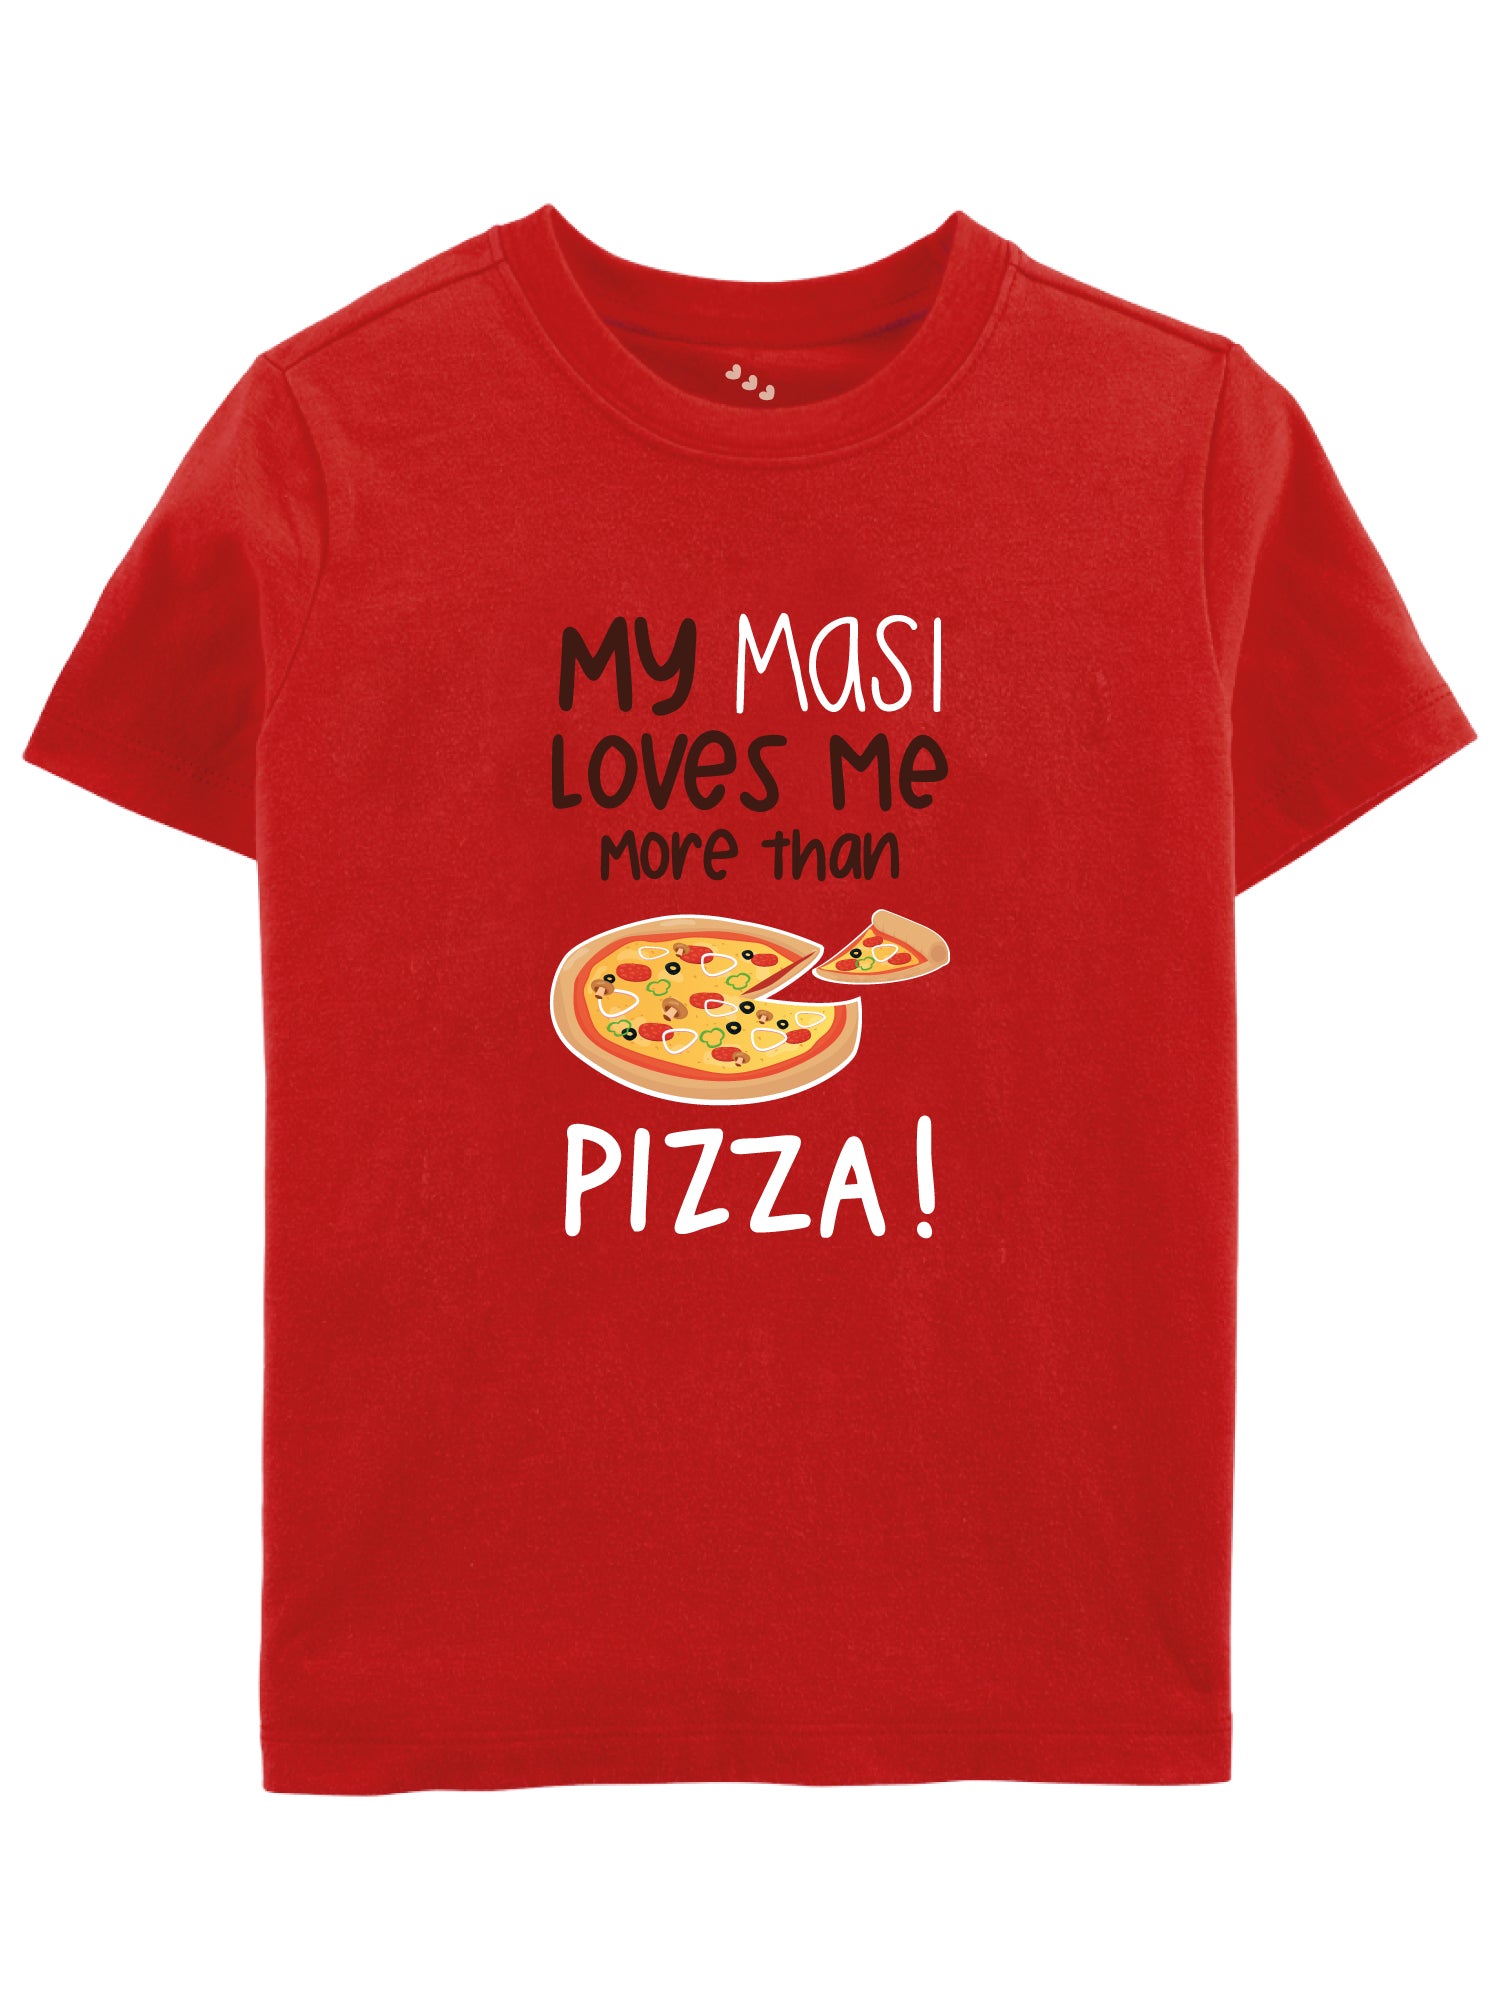 My Masi Loves me More than Pizza - Tee